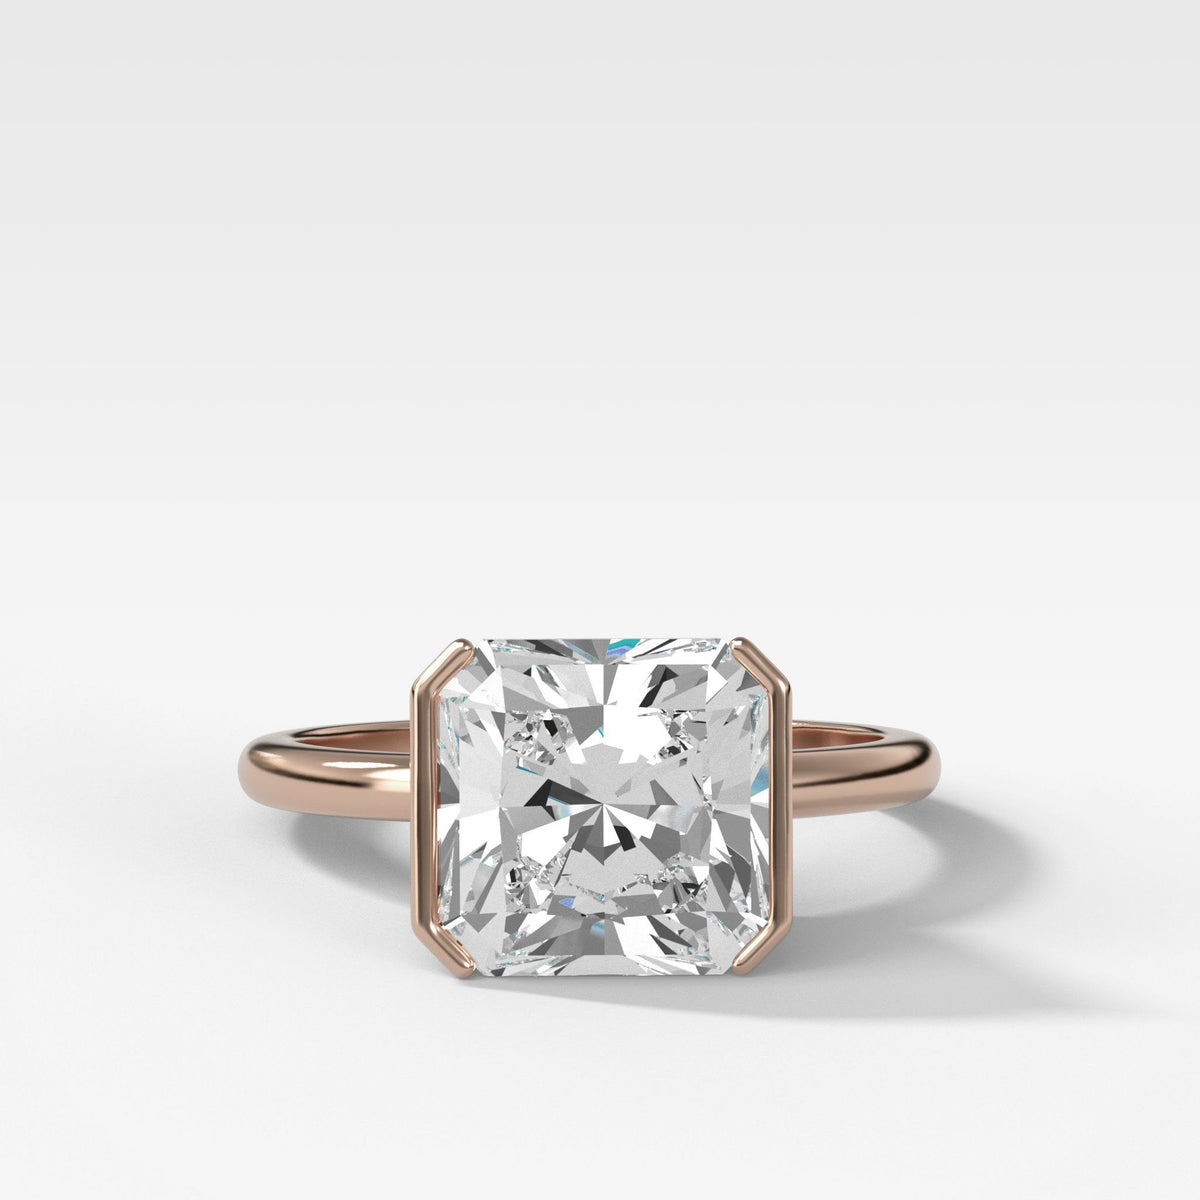 Half Bezel Solitaire Engagement Ring With Square Radiant Cut by Good Stone in Rose Gold